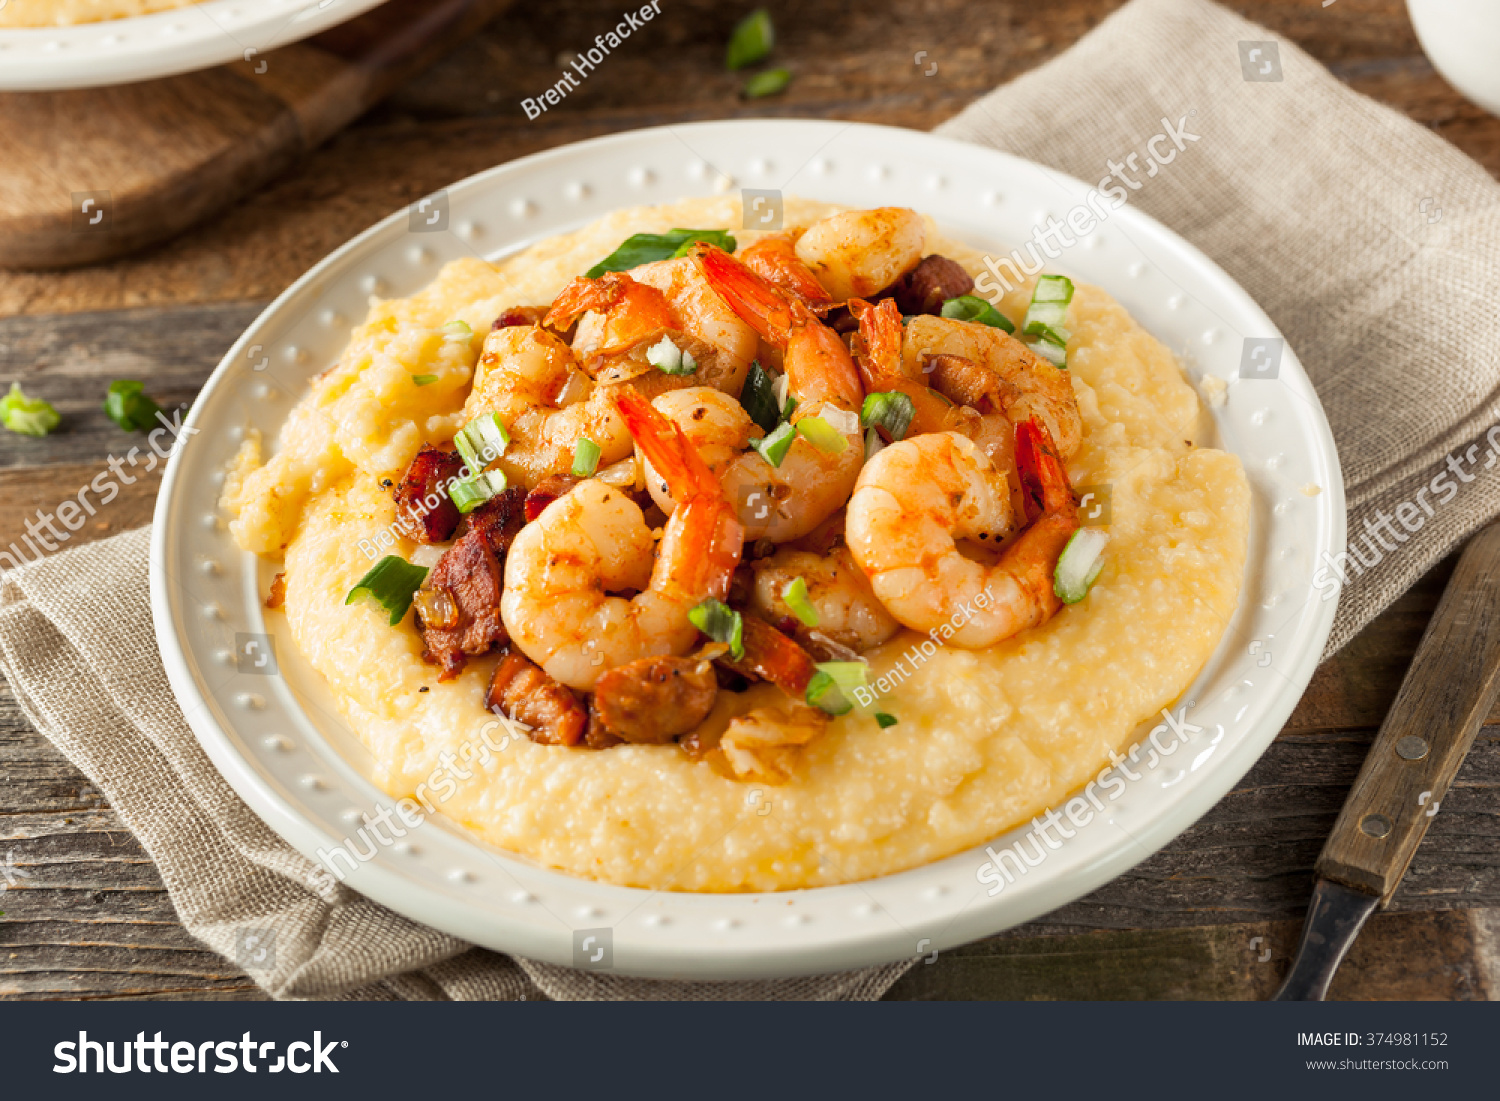 Homemade Shrimp and Grits with Pork and Cheddar #374981152